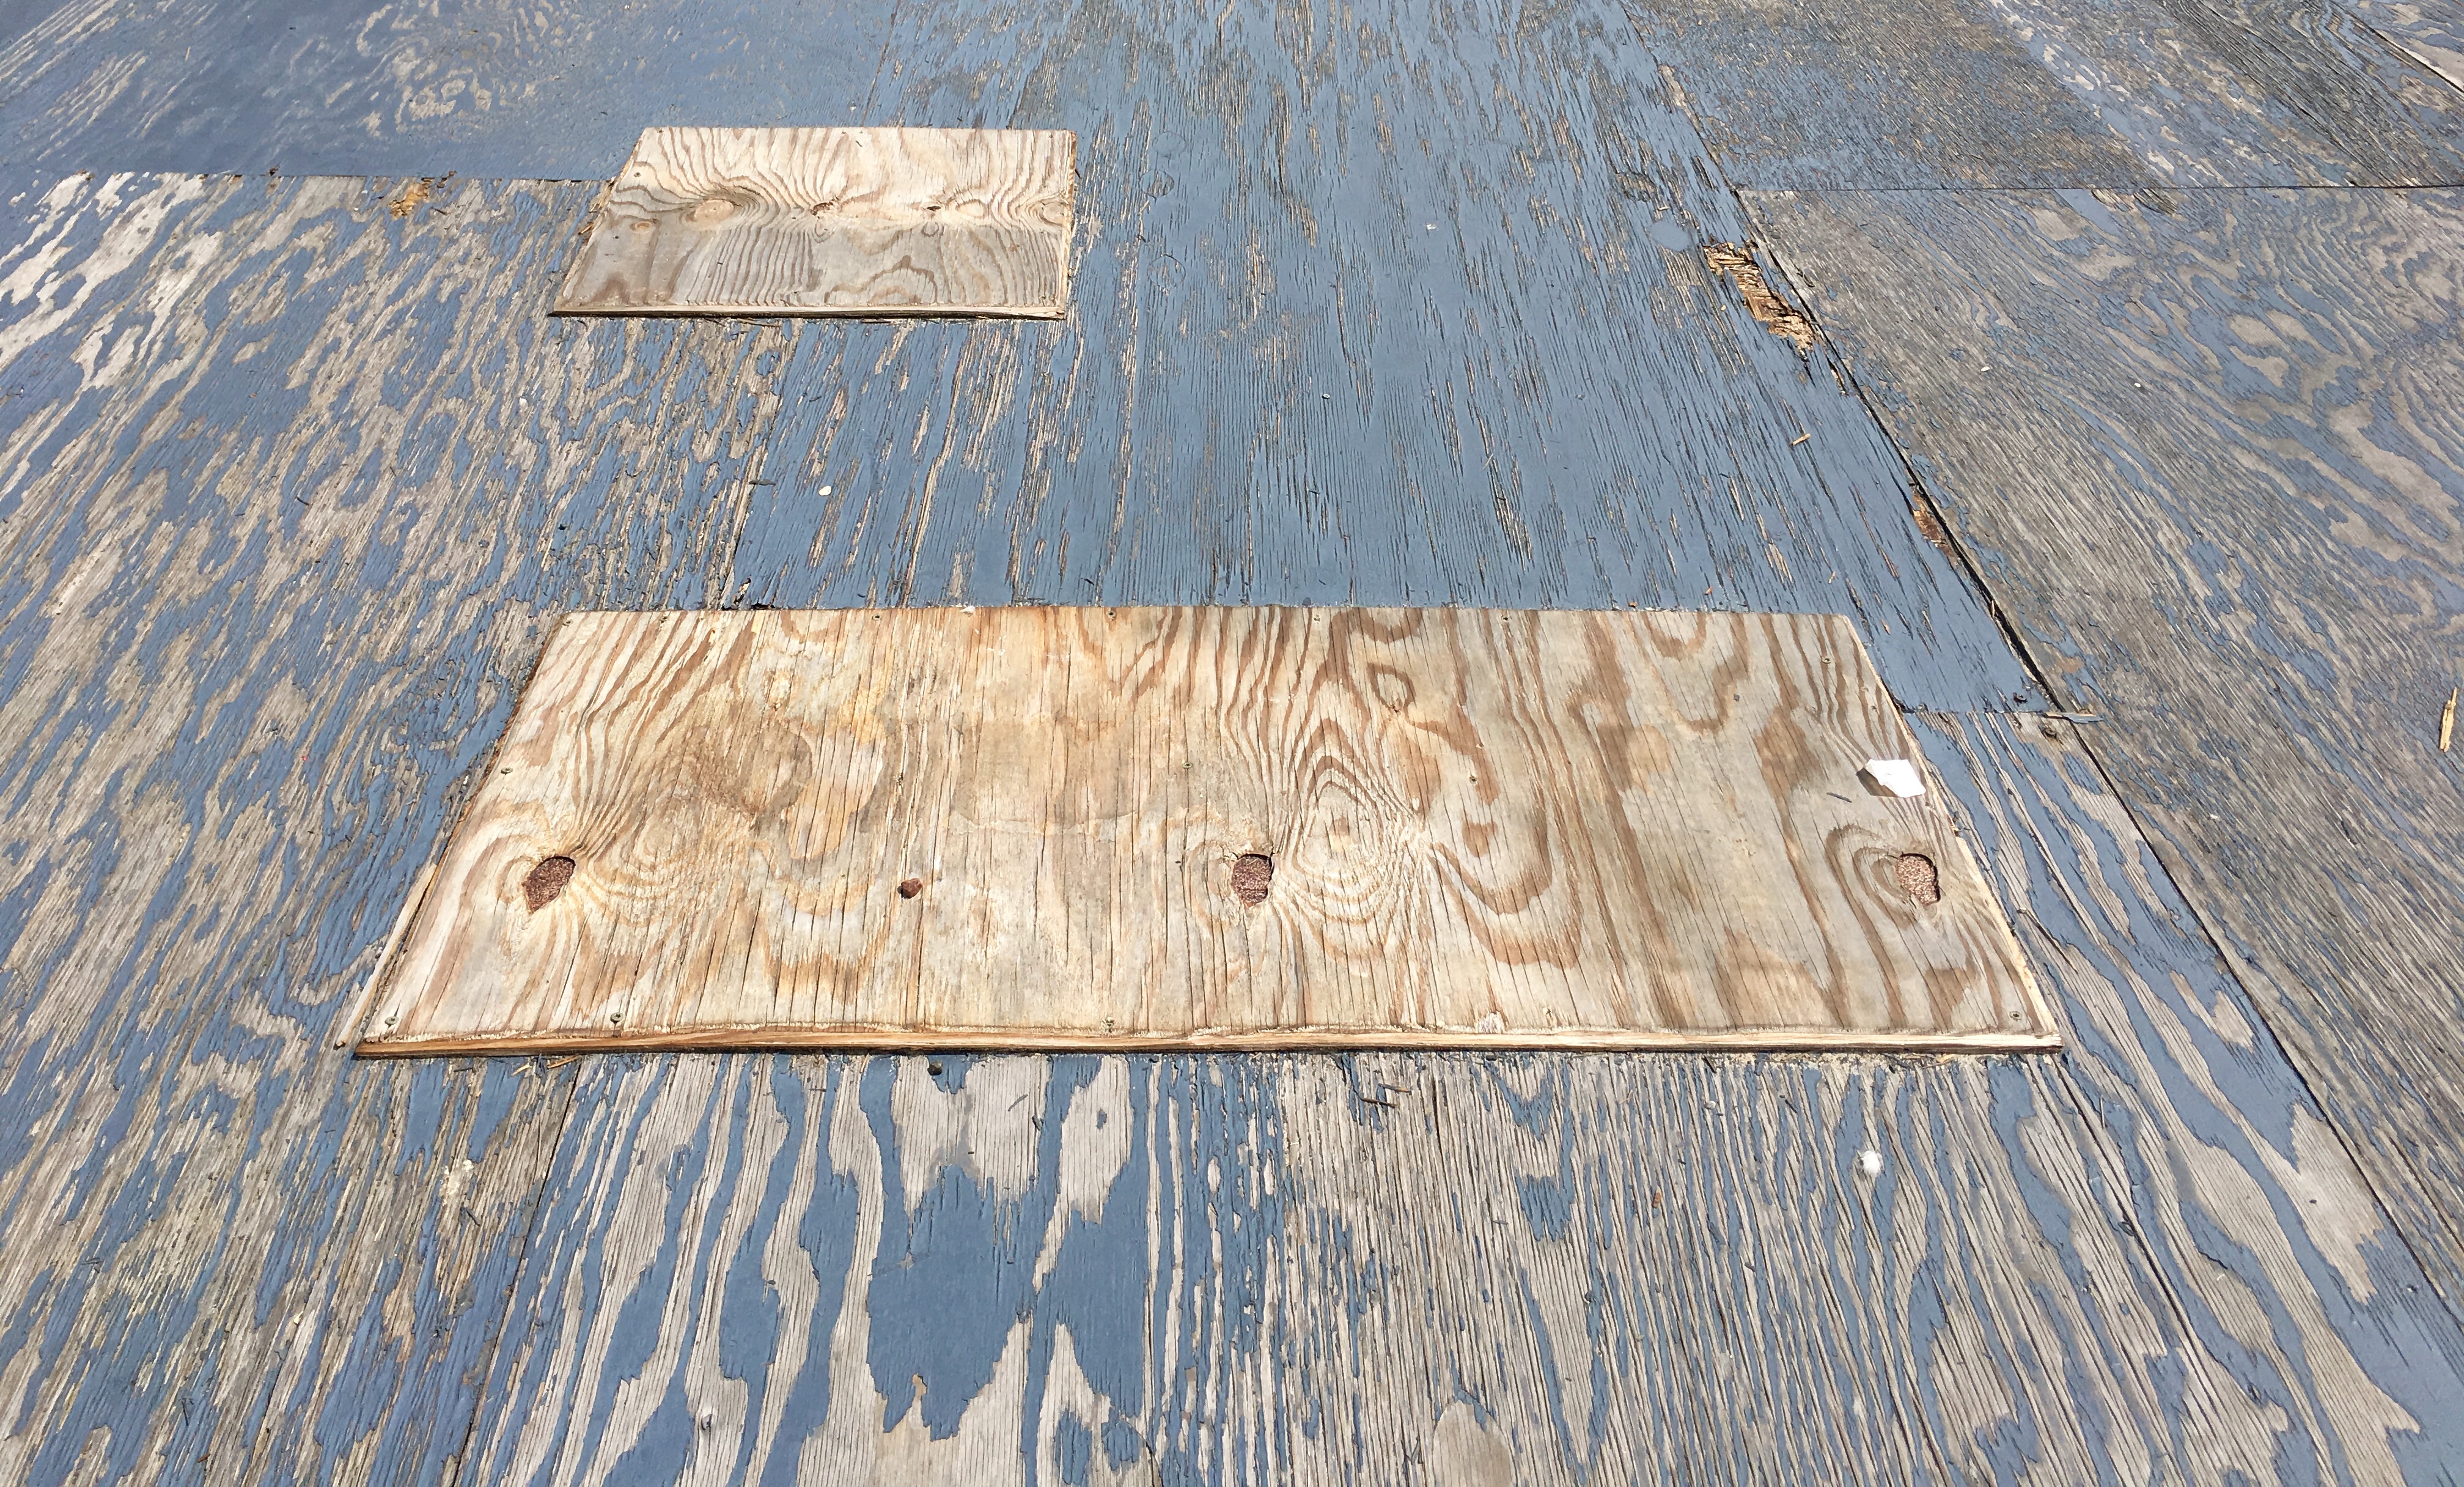 Be careful where you walk on the Coney Island Boardwalk’s patched-up plywood deck. Eagle photo by Lore Croghan